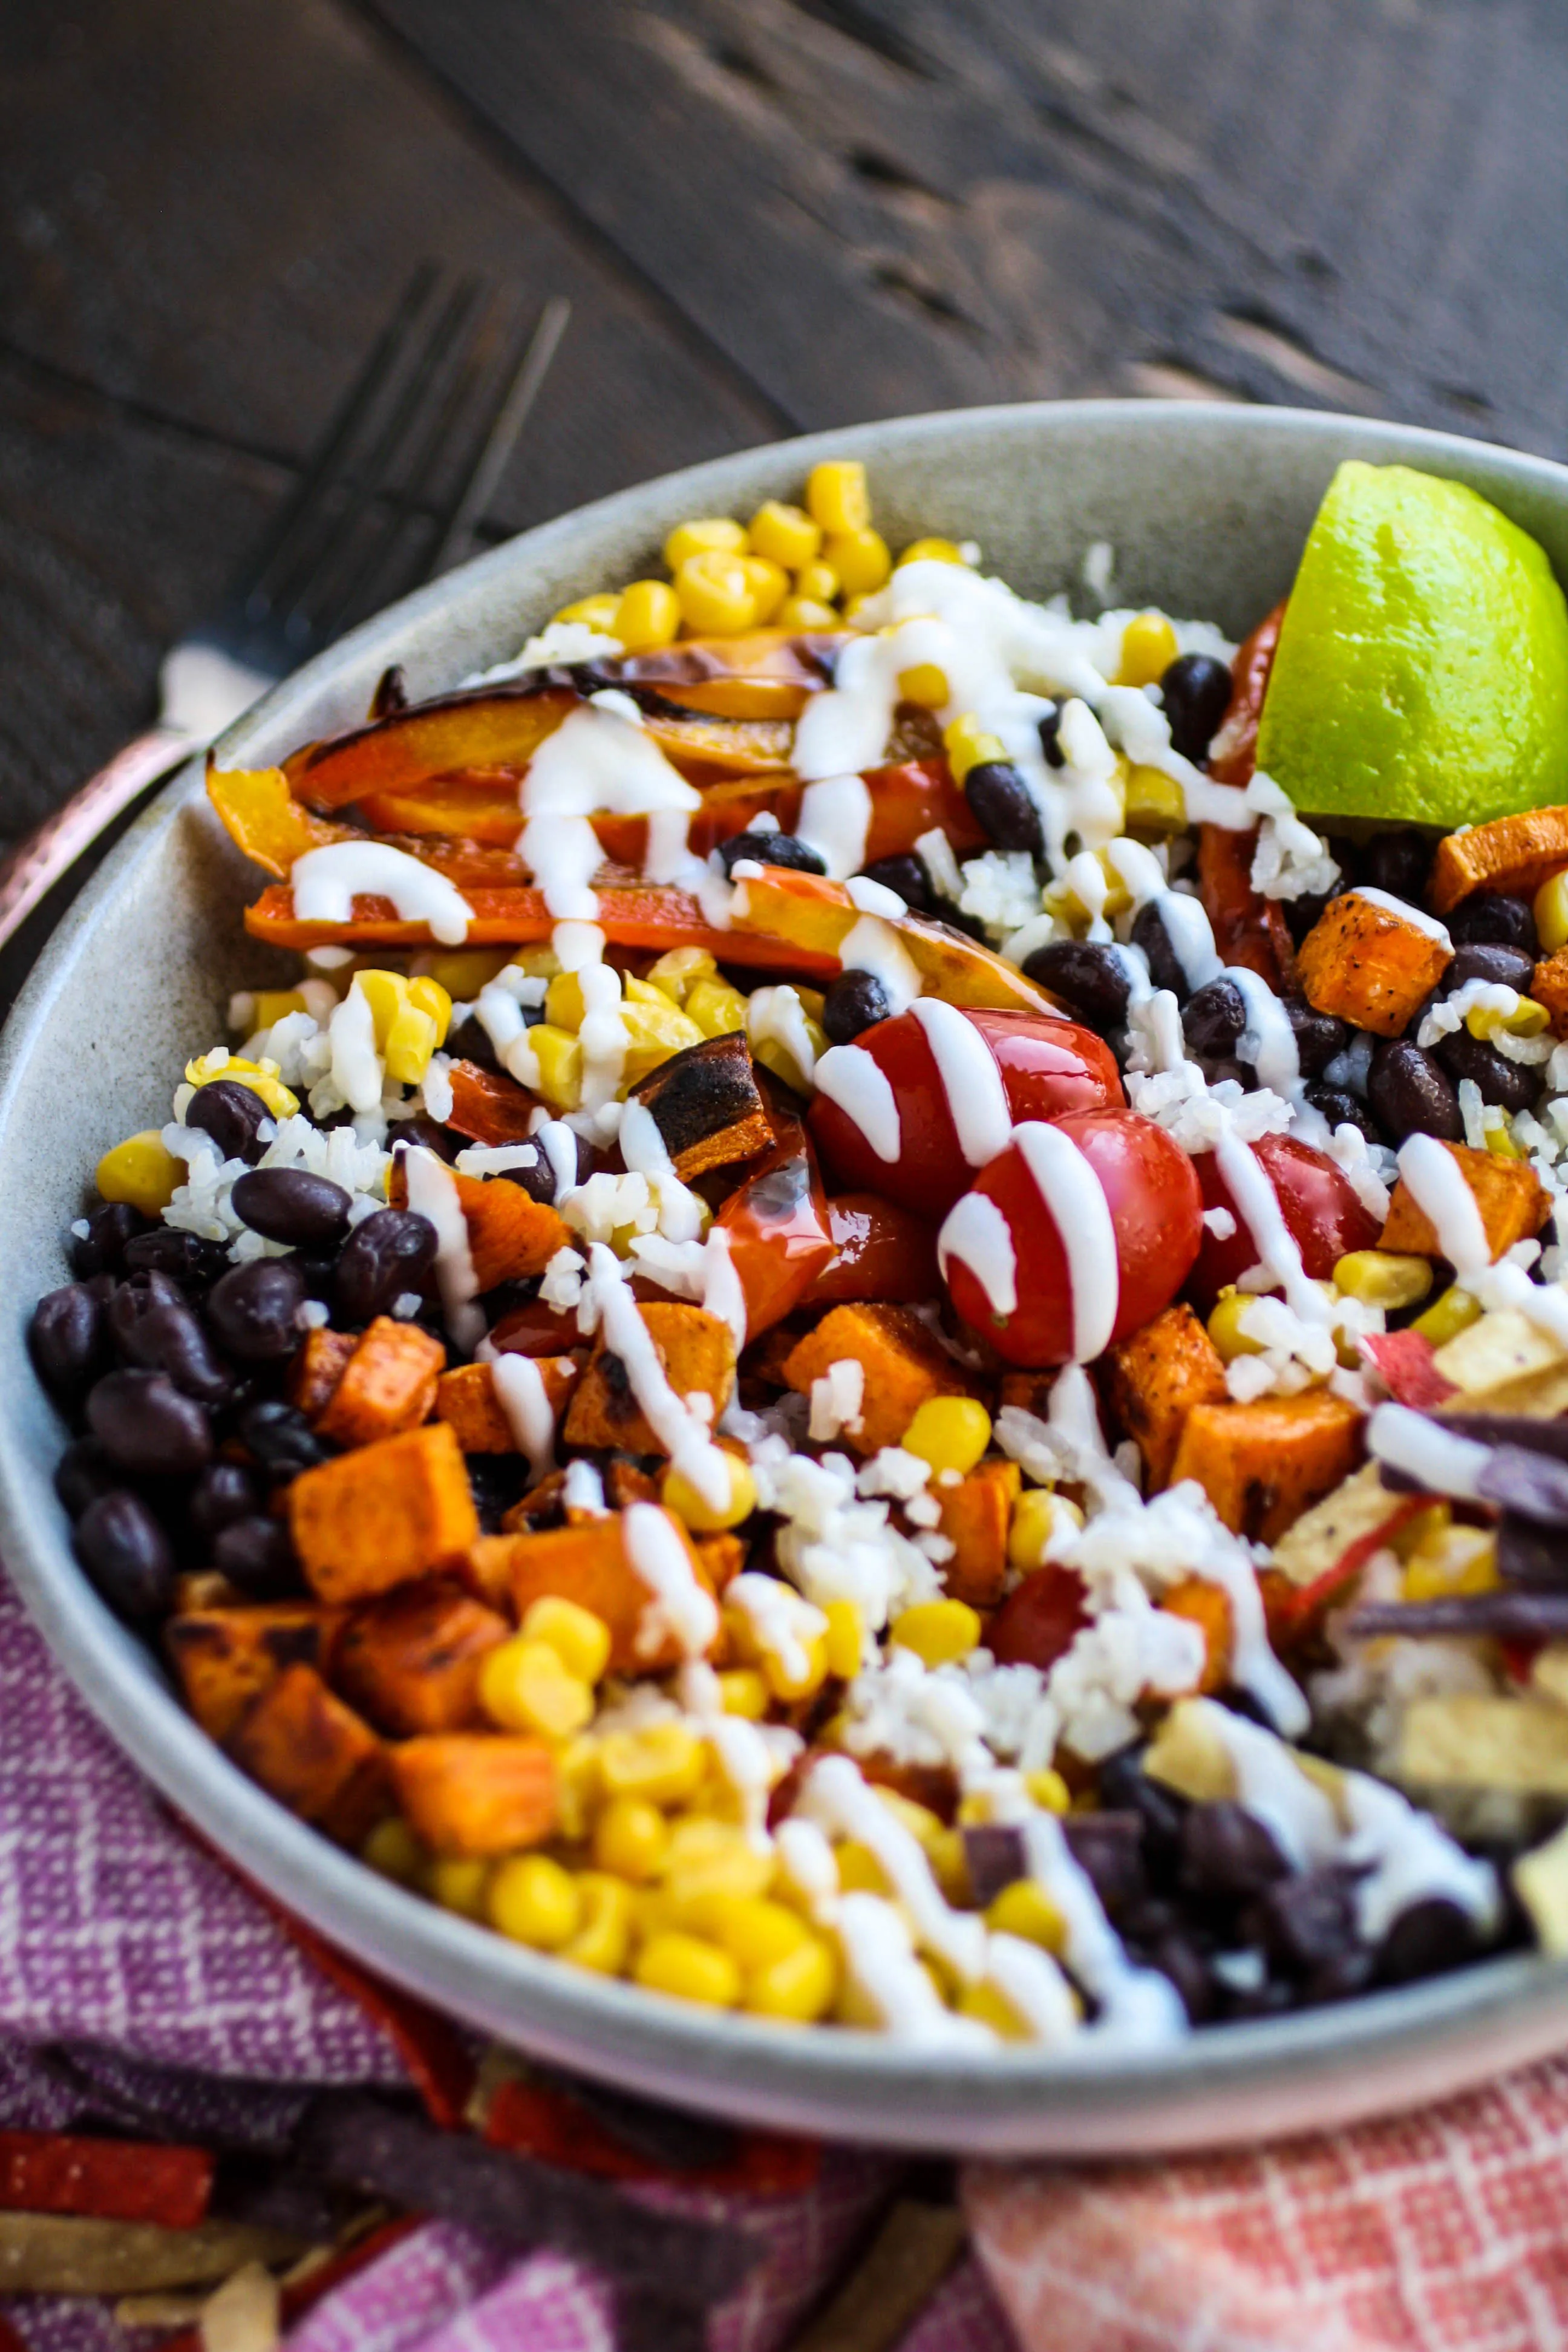 Easy Veggie and Black Bean Pantry Bowls are colorful and filling for any meal.